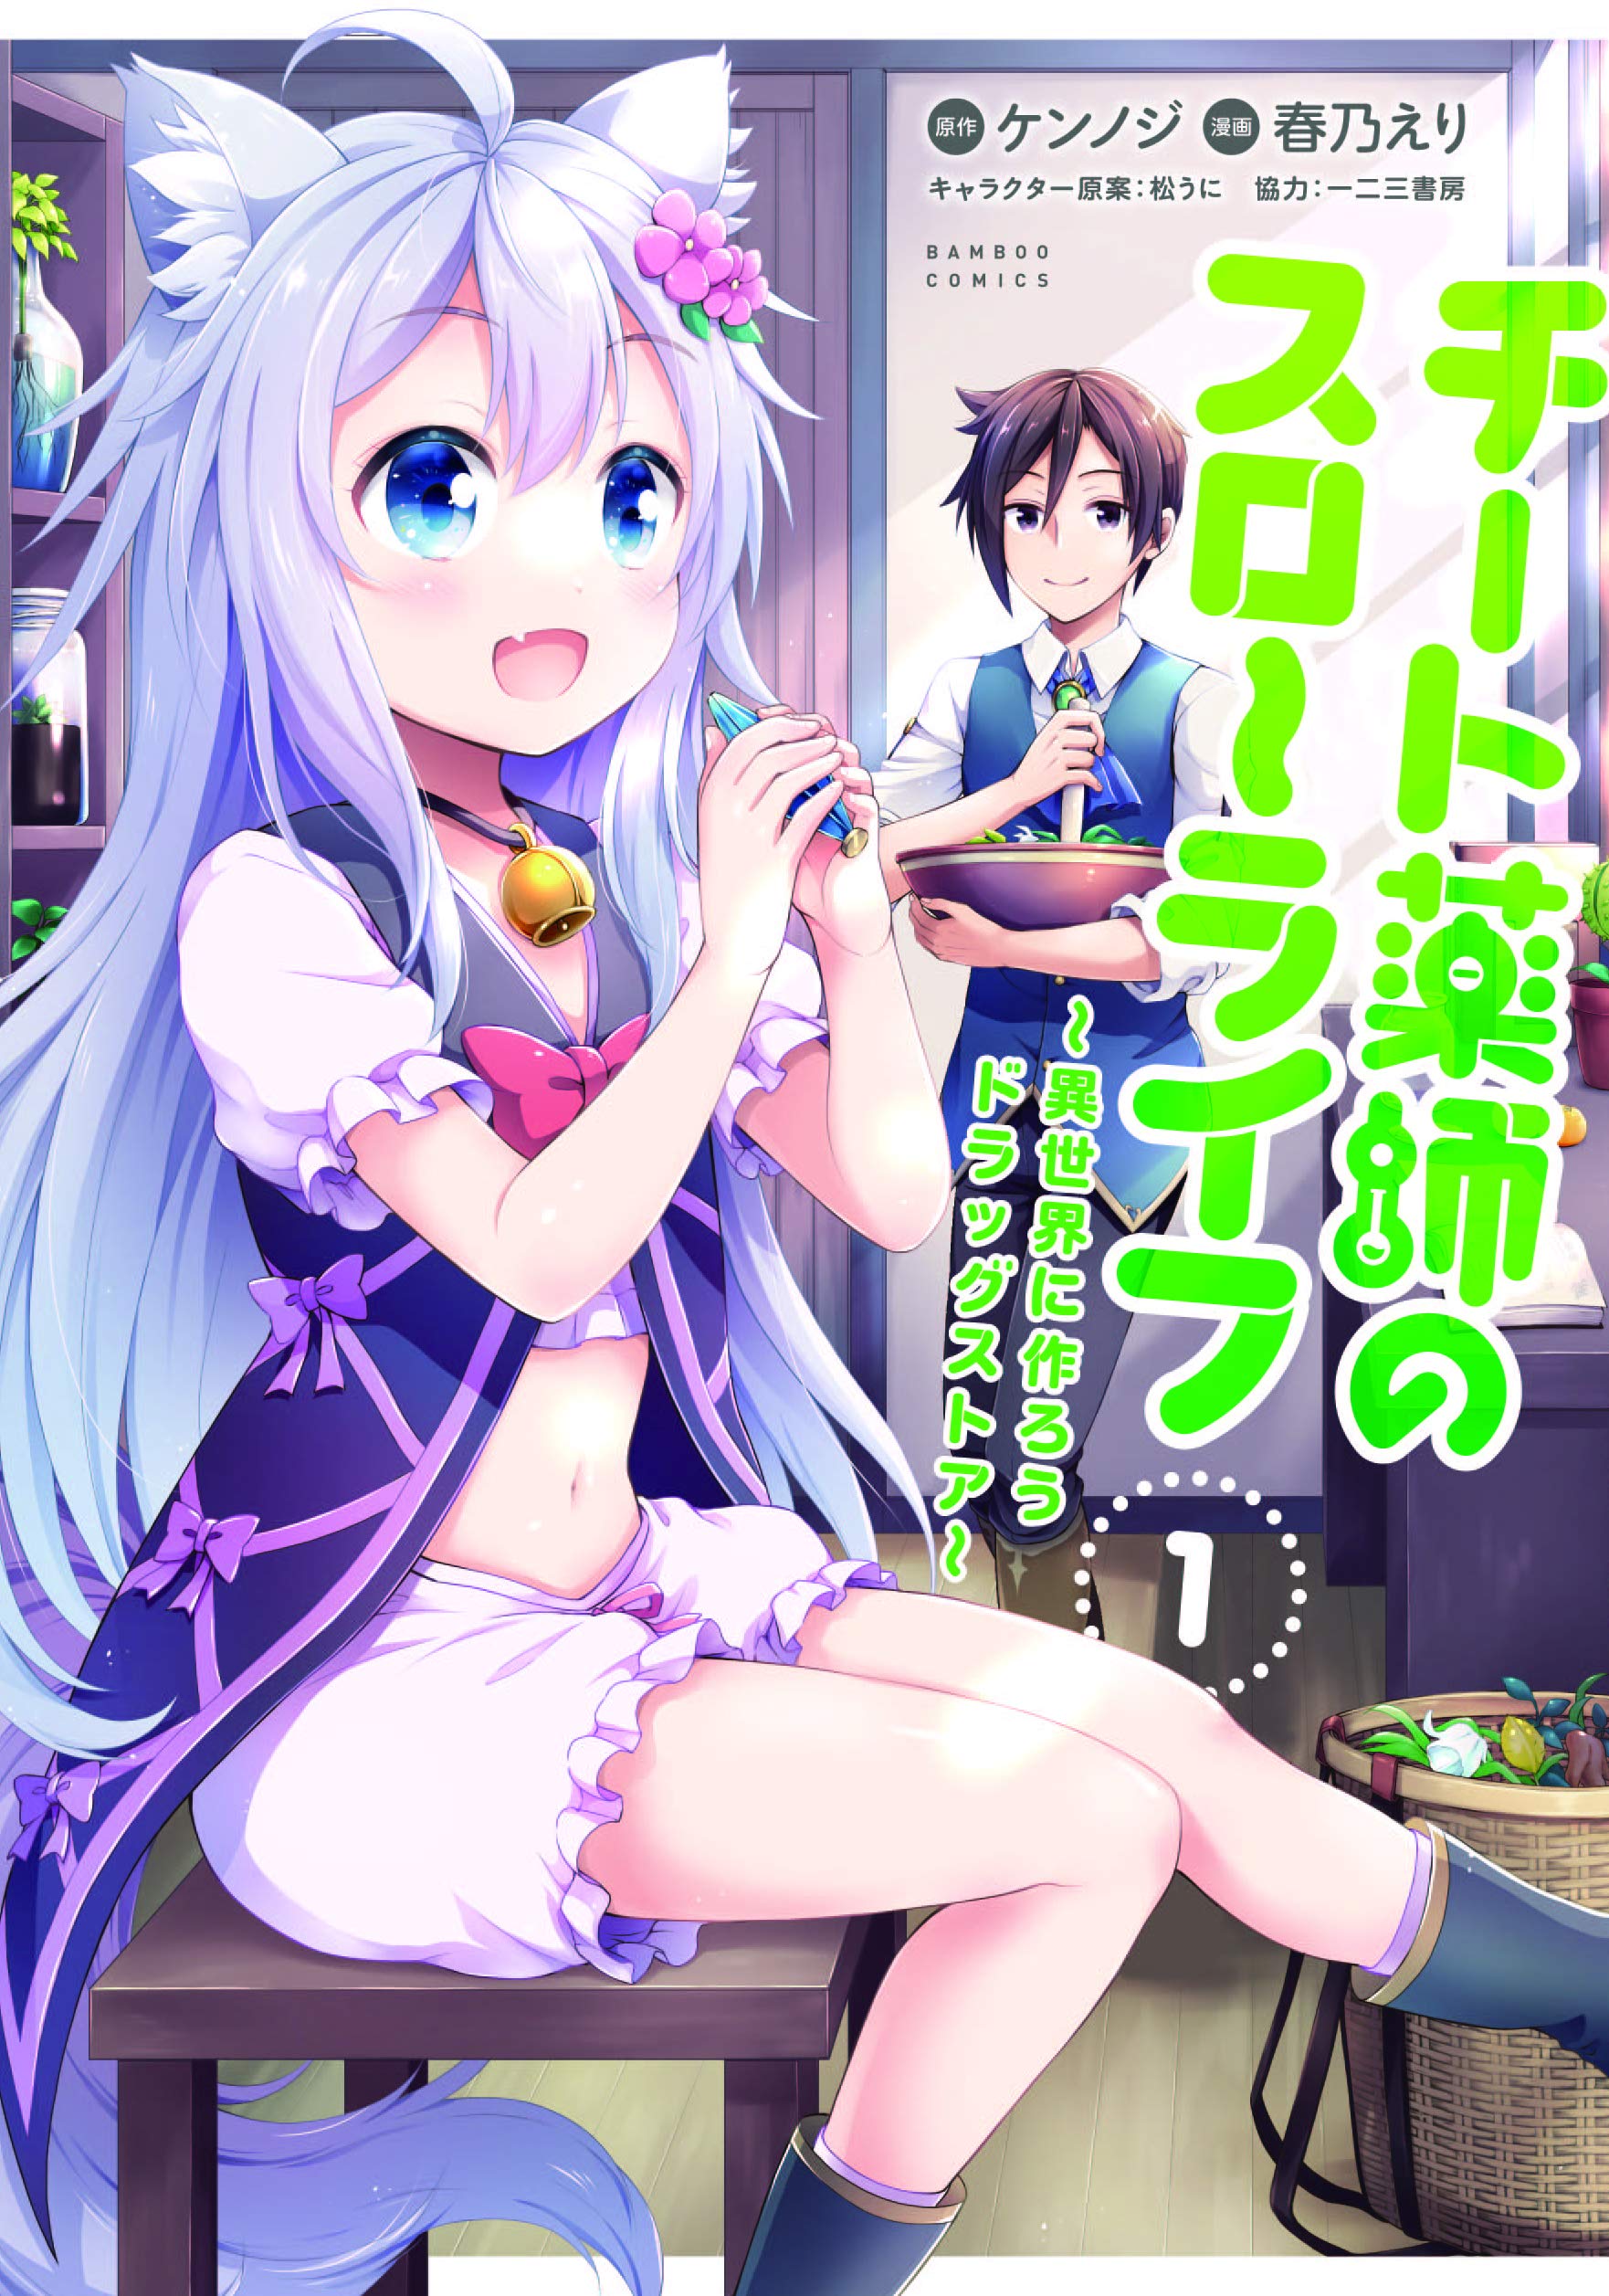 Drugstore in Another World: The Slow Life of a Cheat Pharmacist (Light  Novel) Vol. 8 by Kennoji, Matsuuni, Paperback